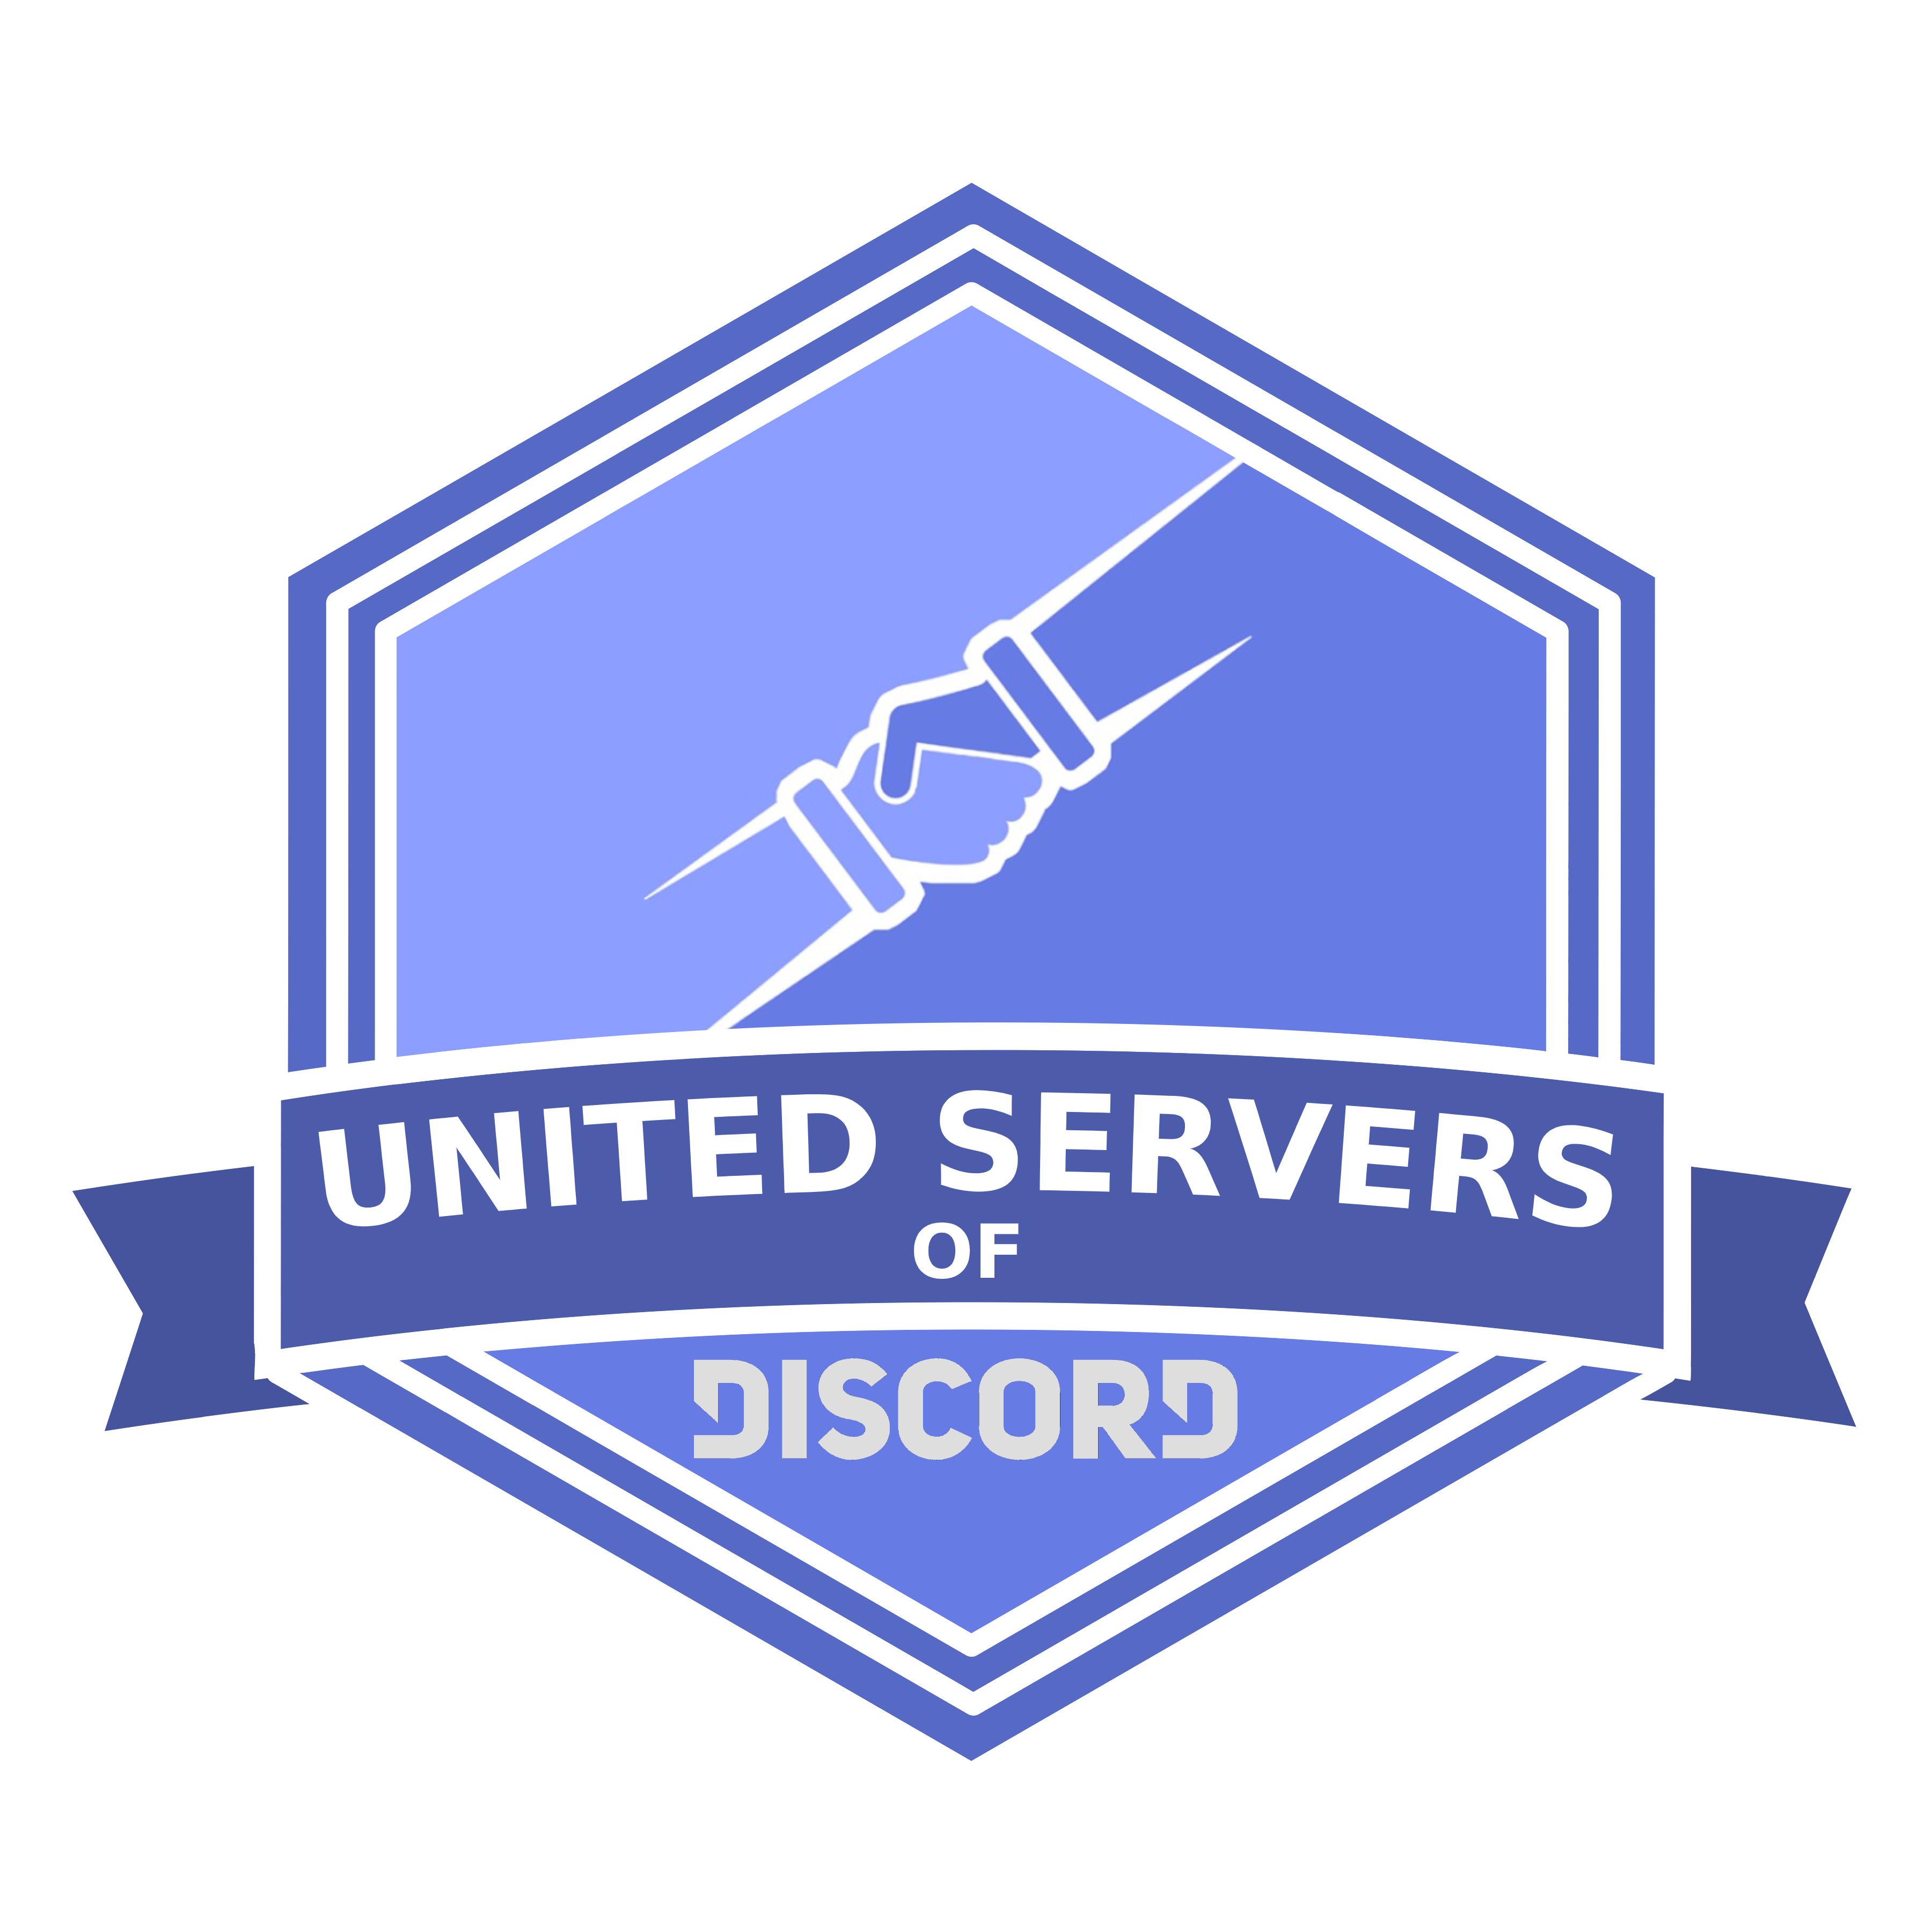 United Servers of Discord.png